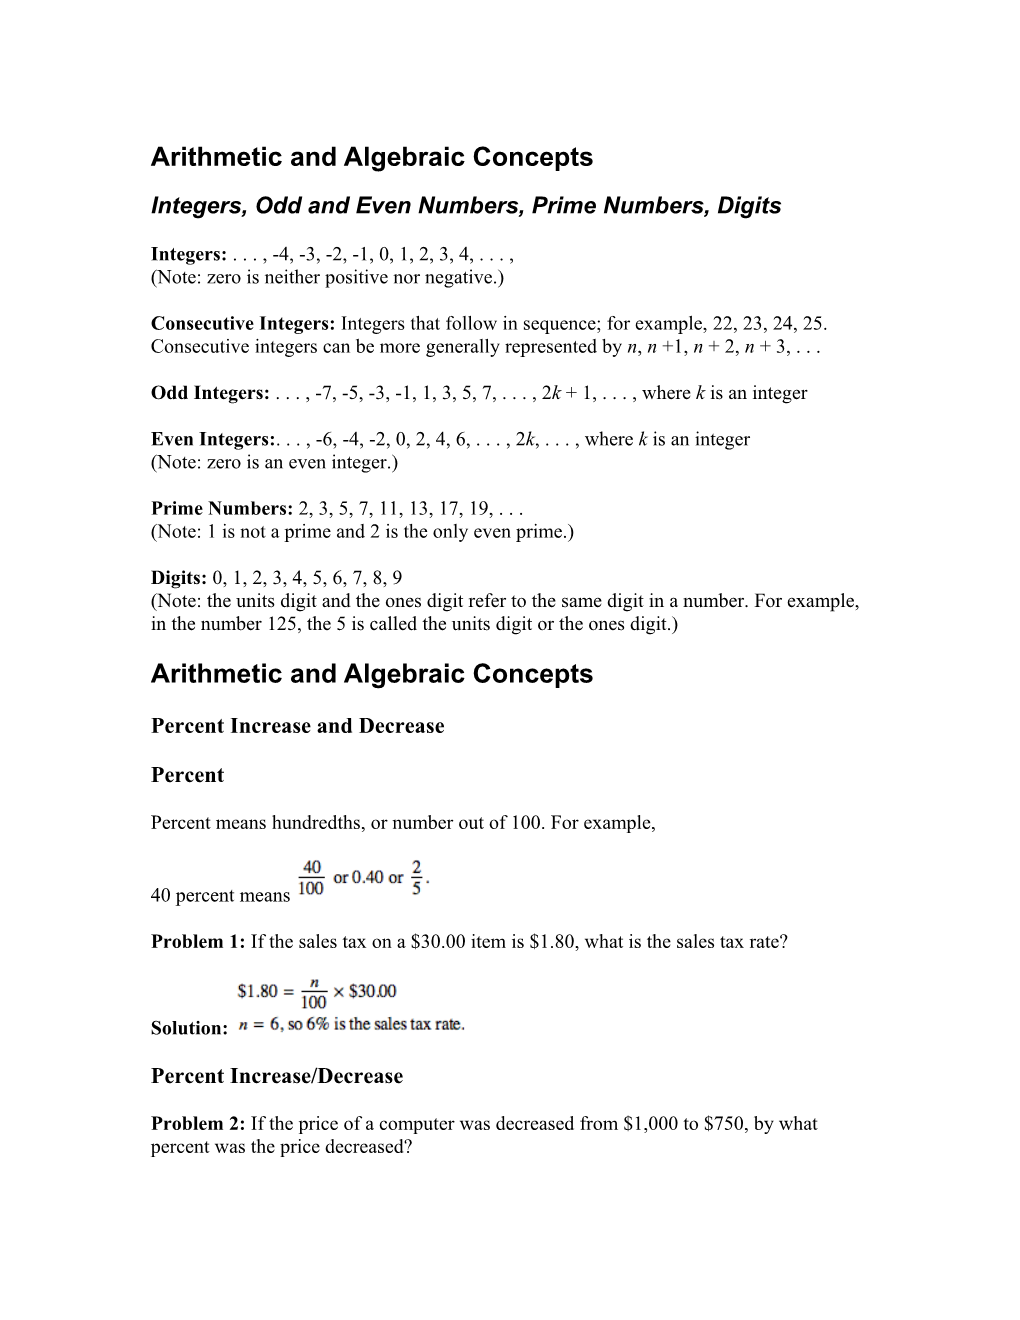 Arithmetic and Algebraic Concepts